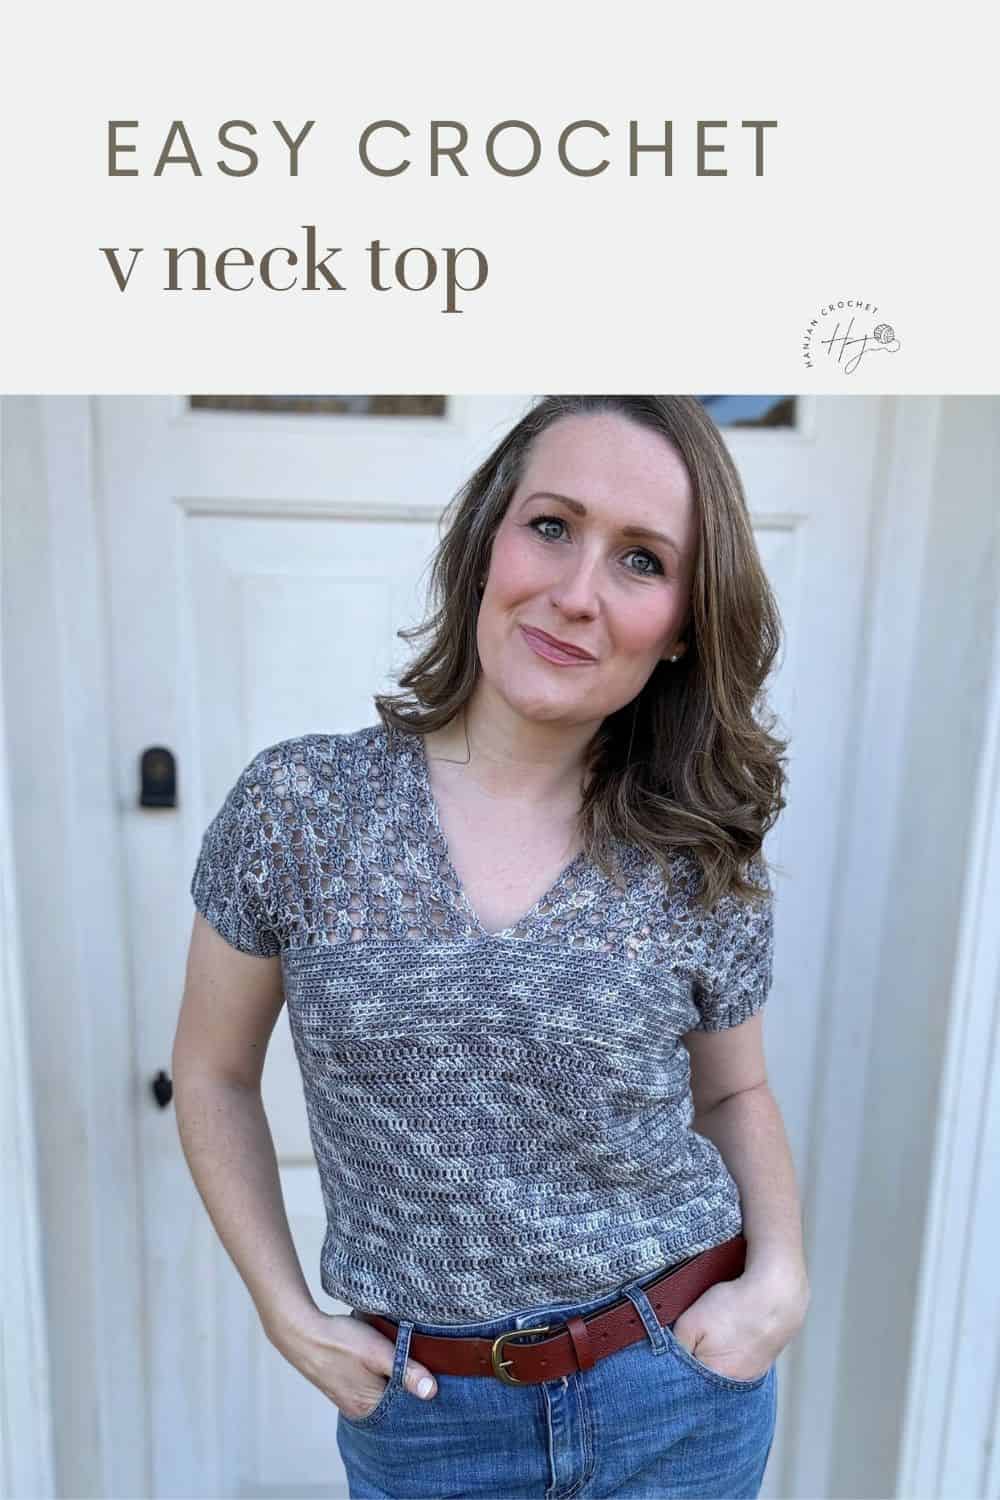 A woman wearing a stylish v neck crochet top stands in front of a white door. Text at the top reads, "Easy Crochet V Neck Top.